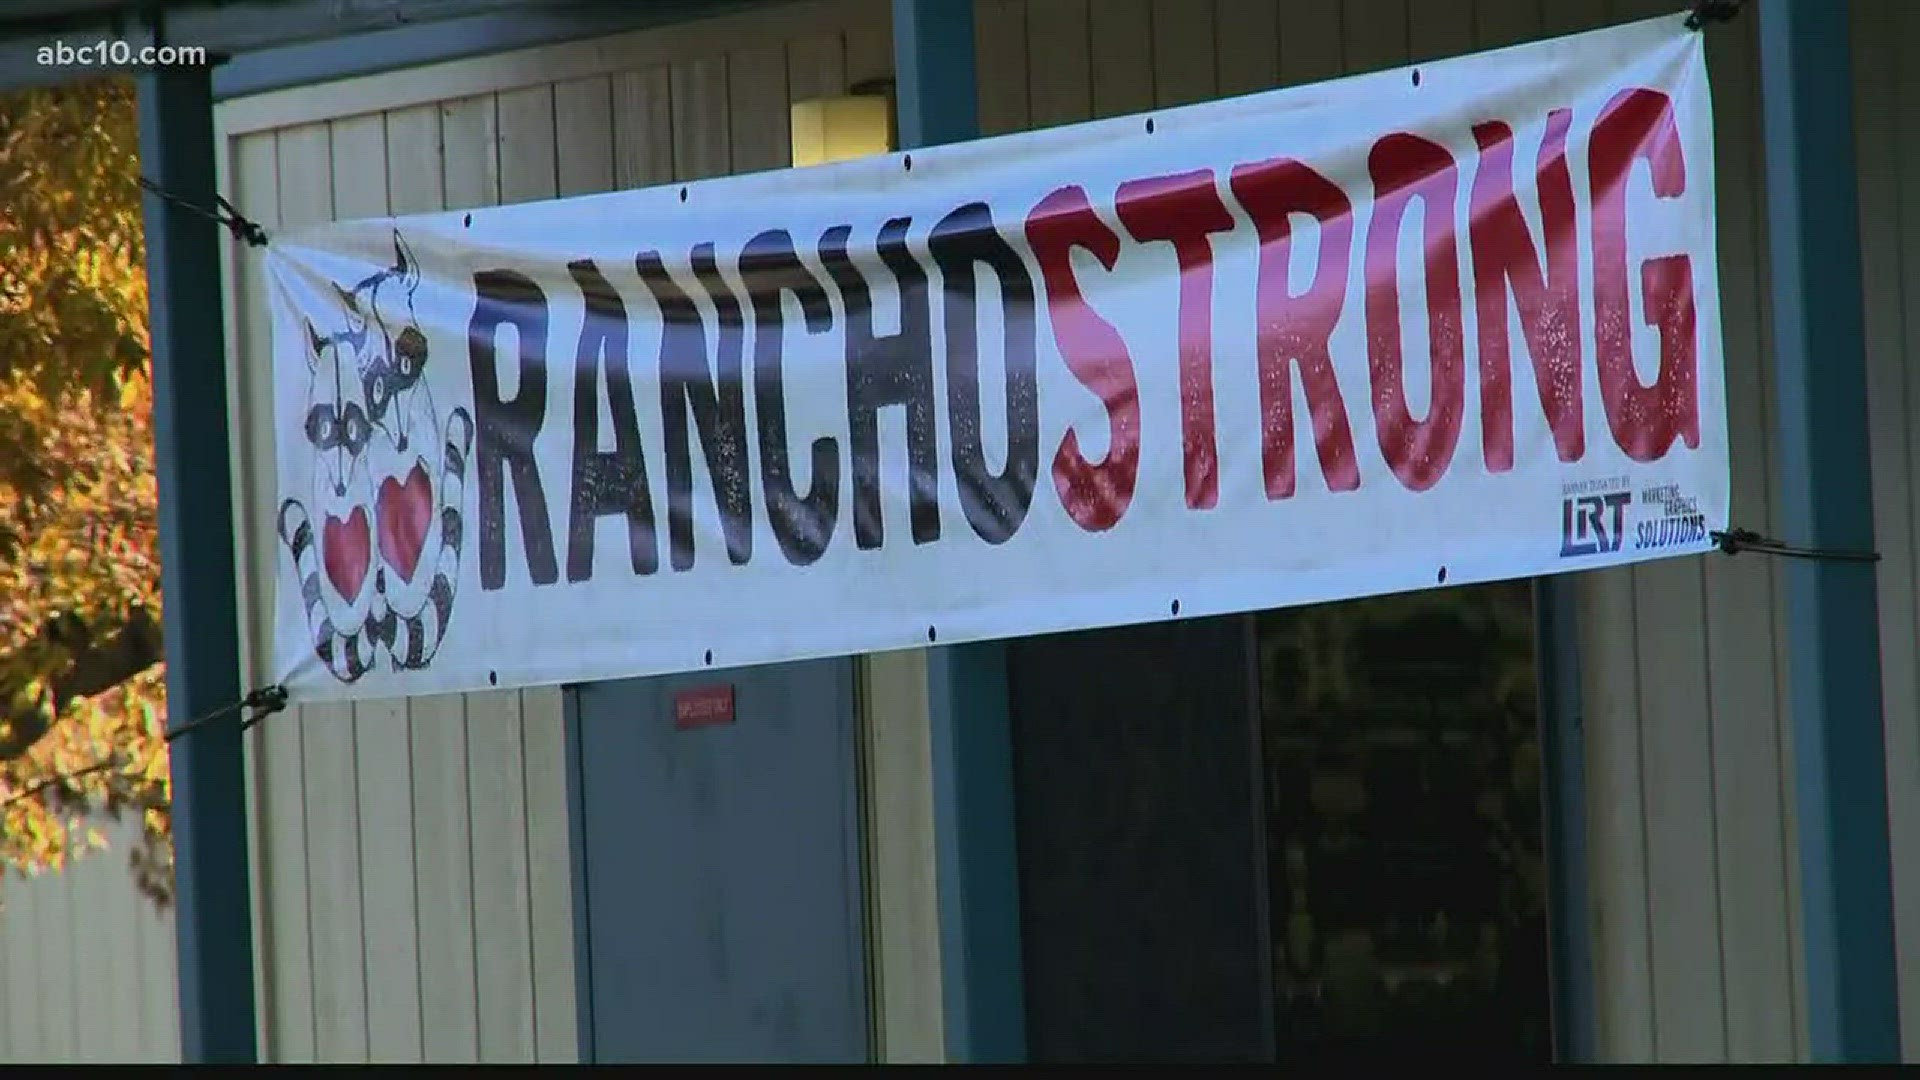 The students of Rancho Tehama Elementary returned to school Monday, nearly two weeks after a deadly shooting rampage rocked their community.